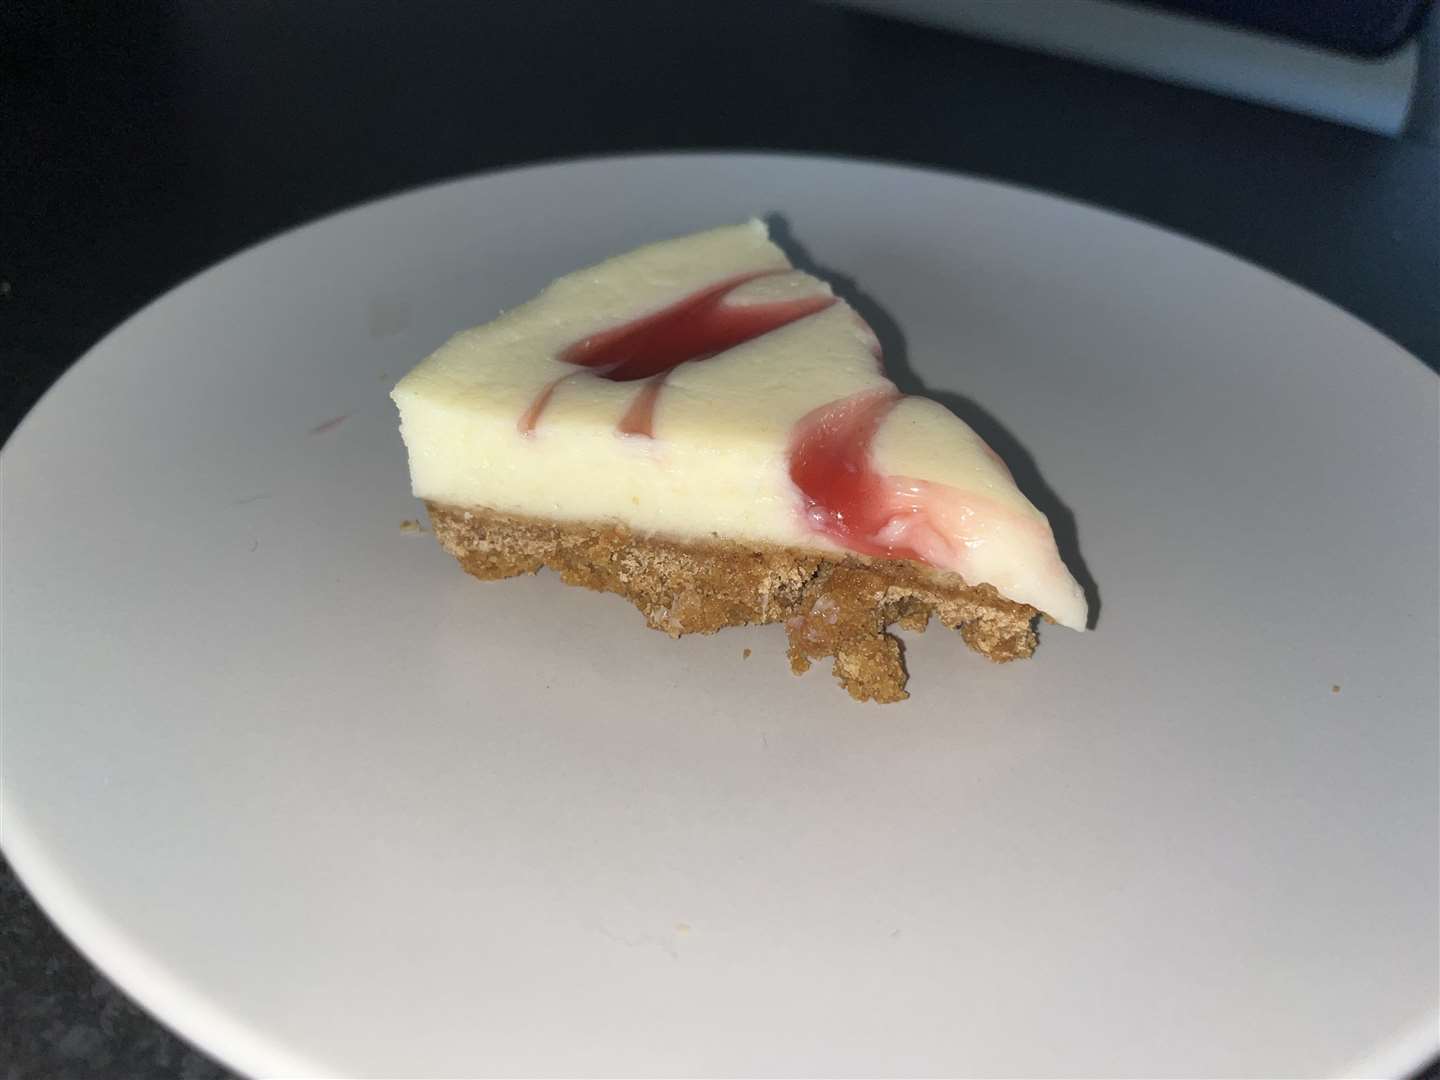 The cheesecake both looked and tasted good